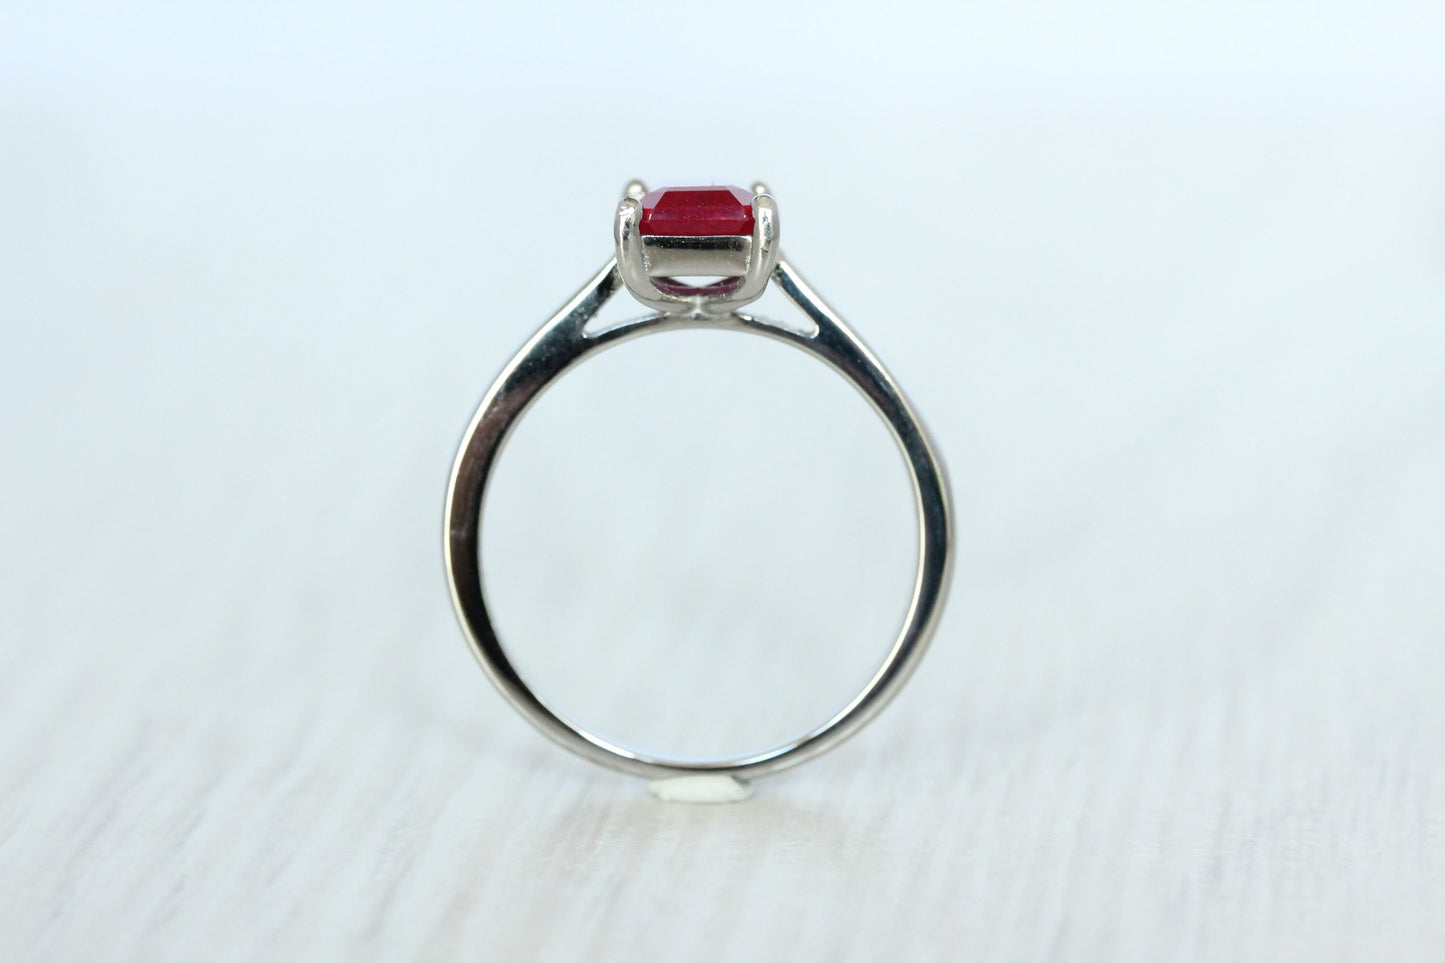 2ct Natural Ruby, Emerald Cut Solitaire cathedral ring in Titanium or White Gold